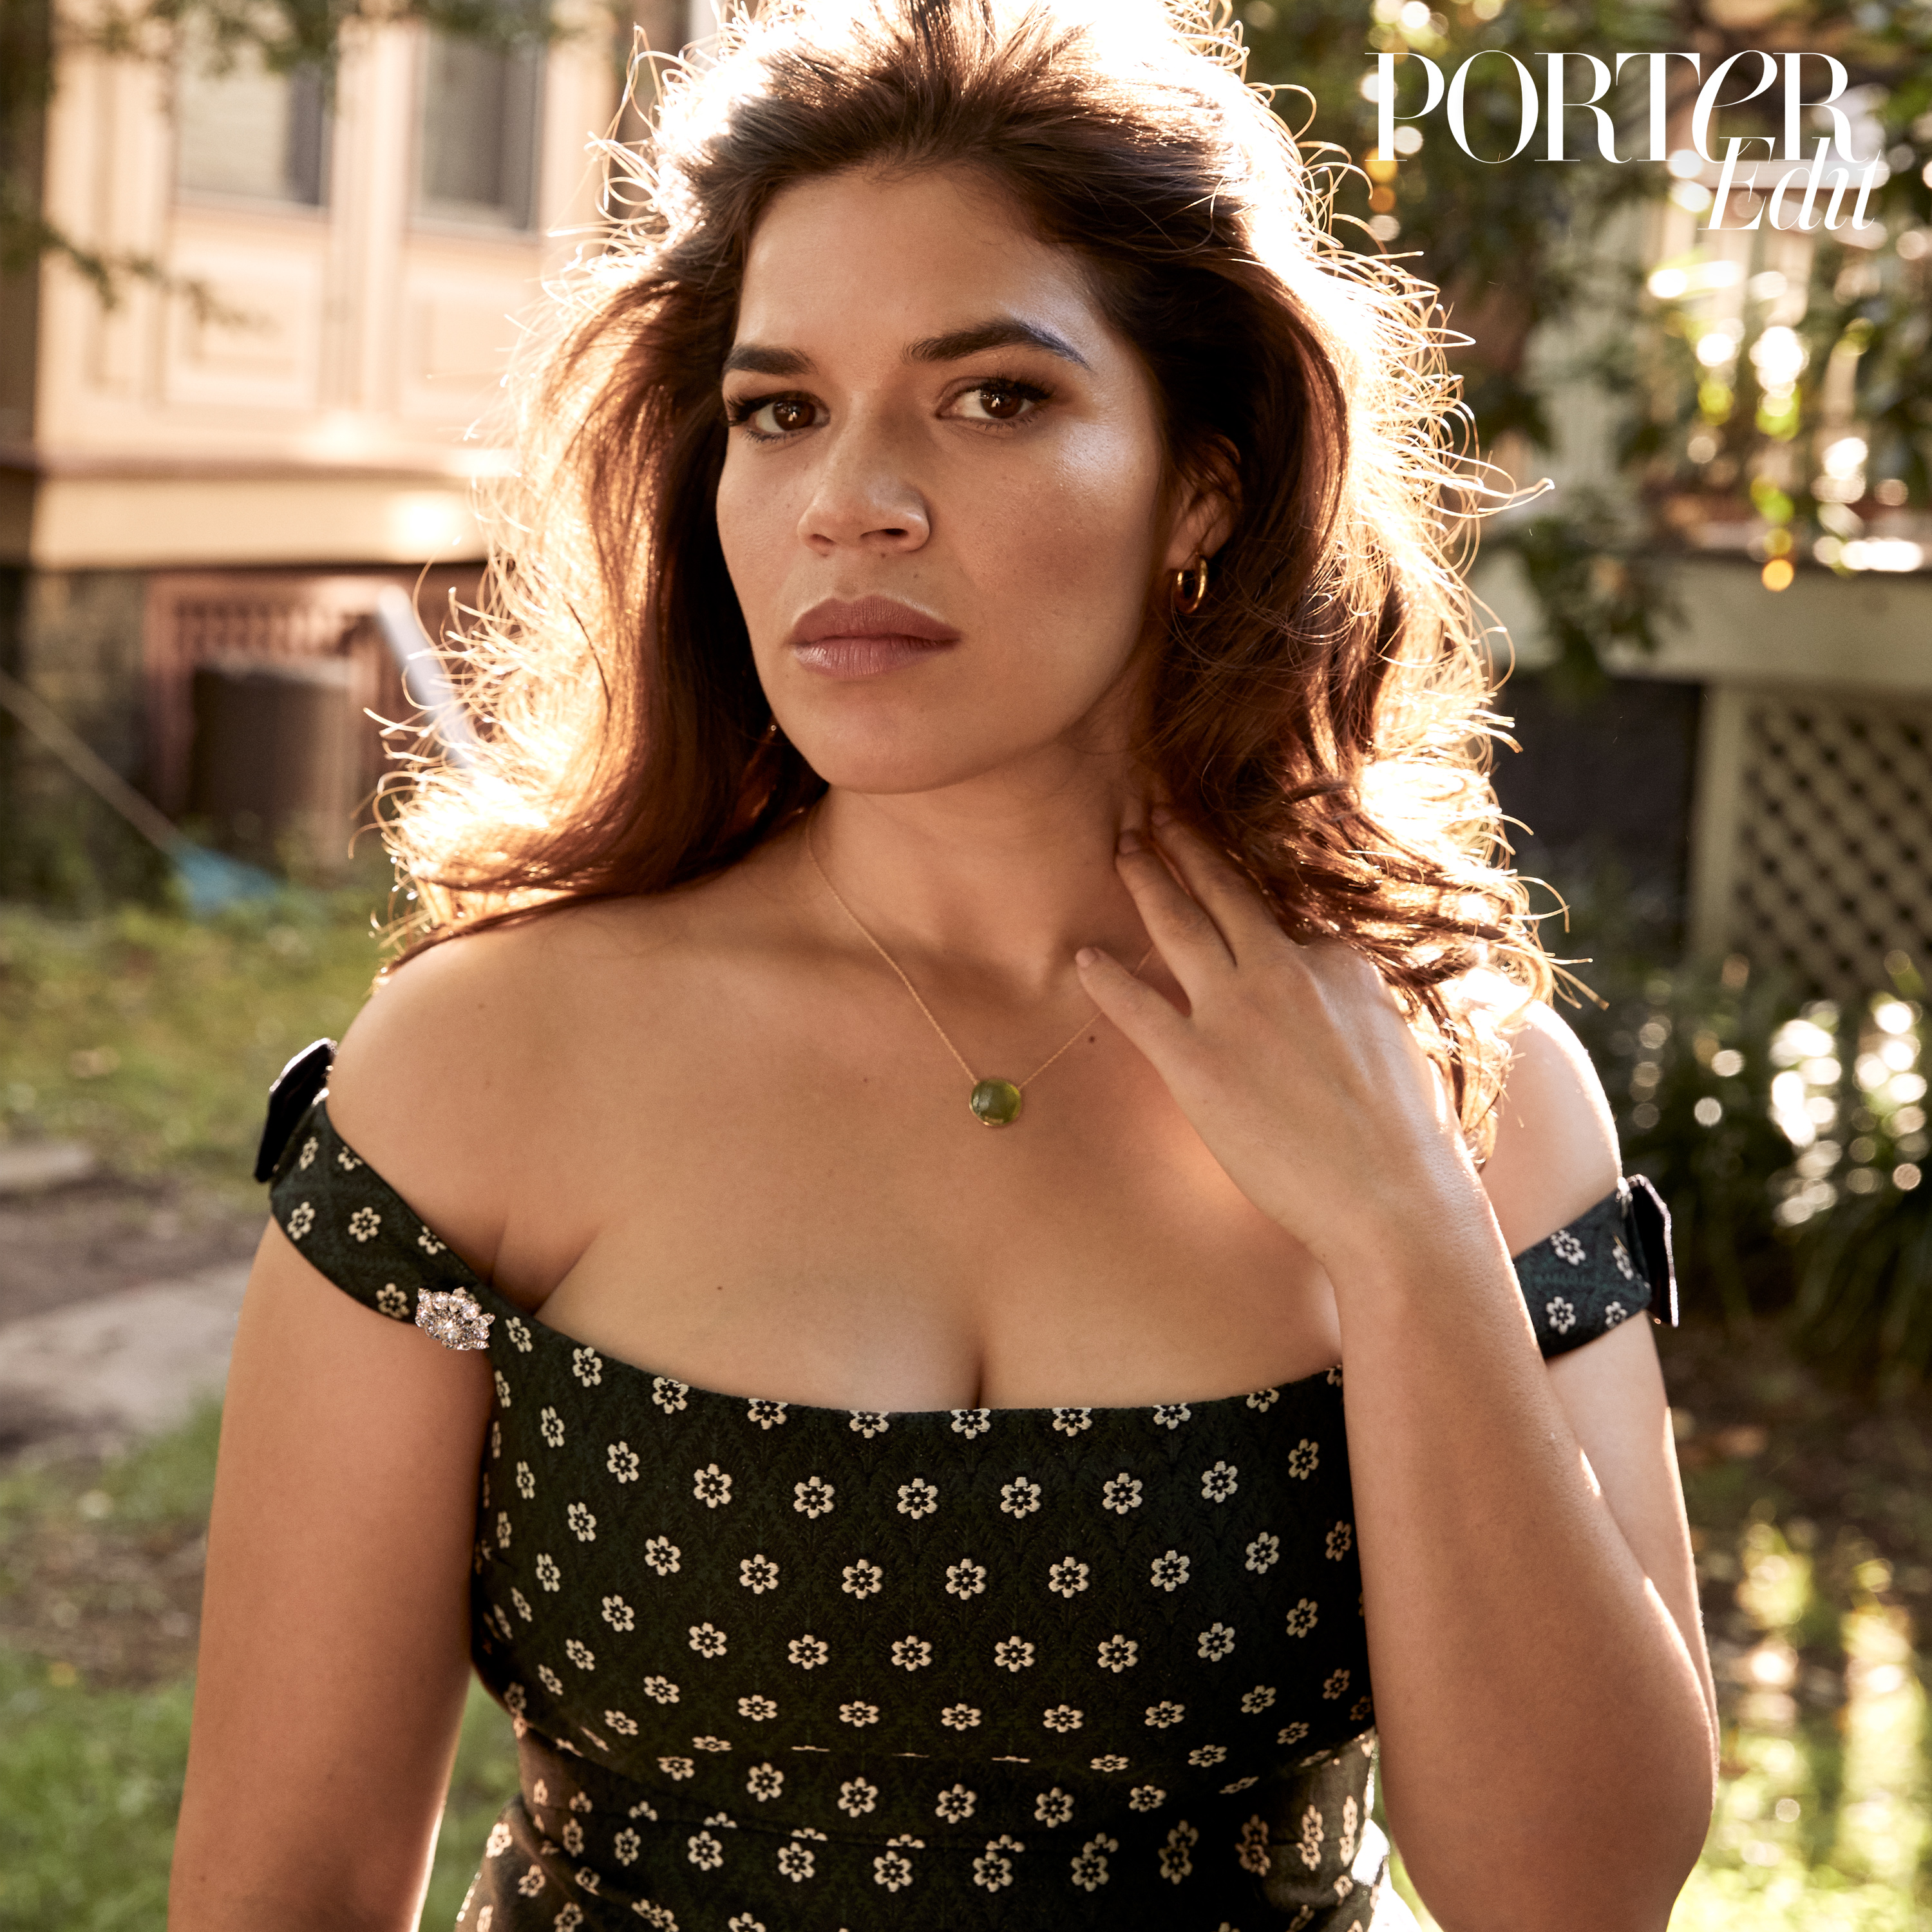 America Ferrera On Ugly Betty Activism Refusing To Stay Silent Porter